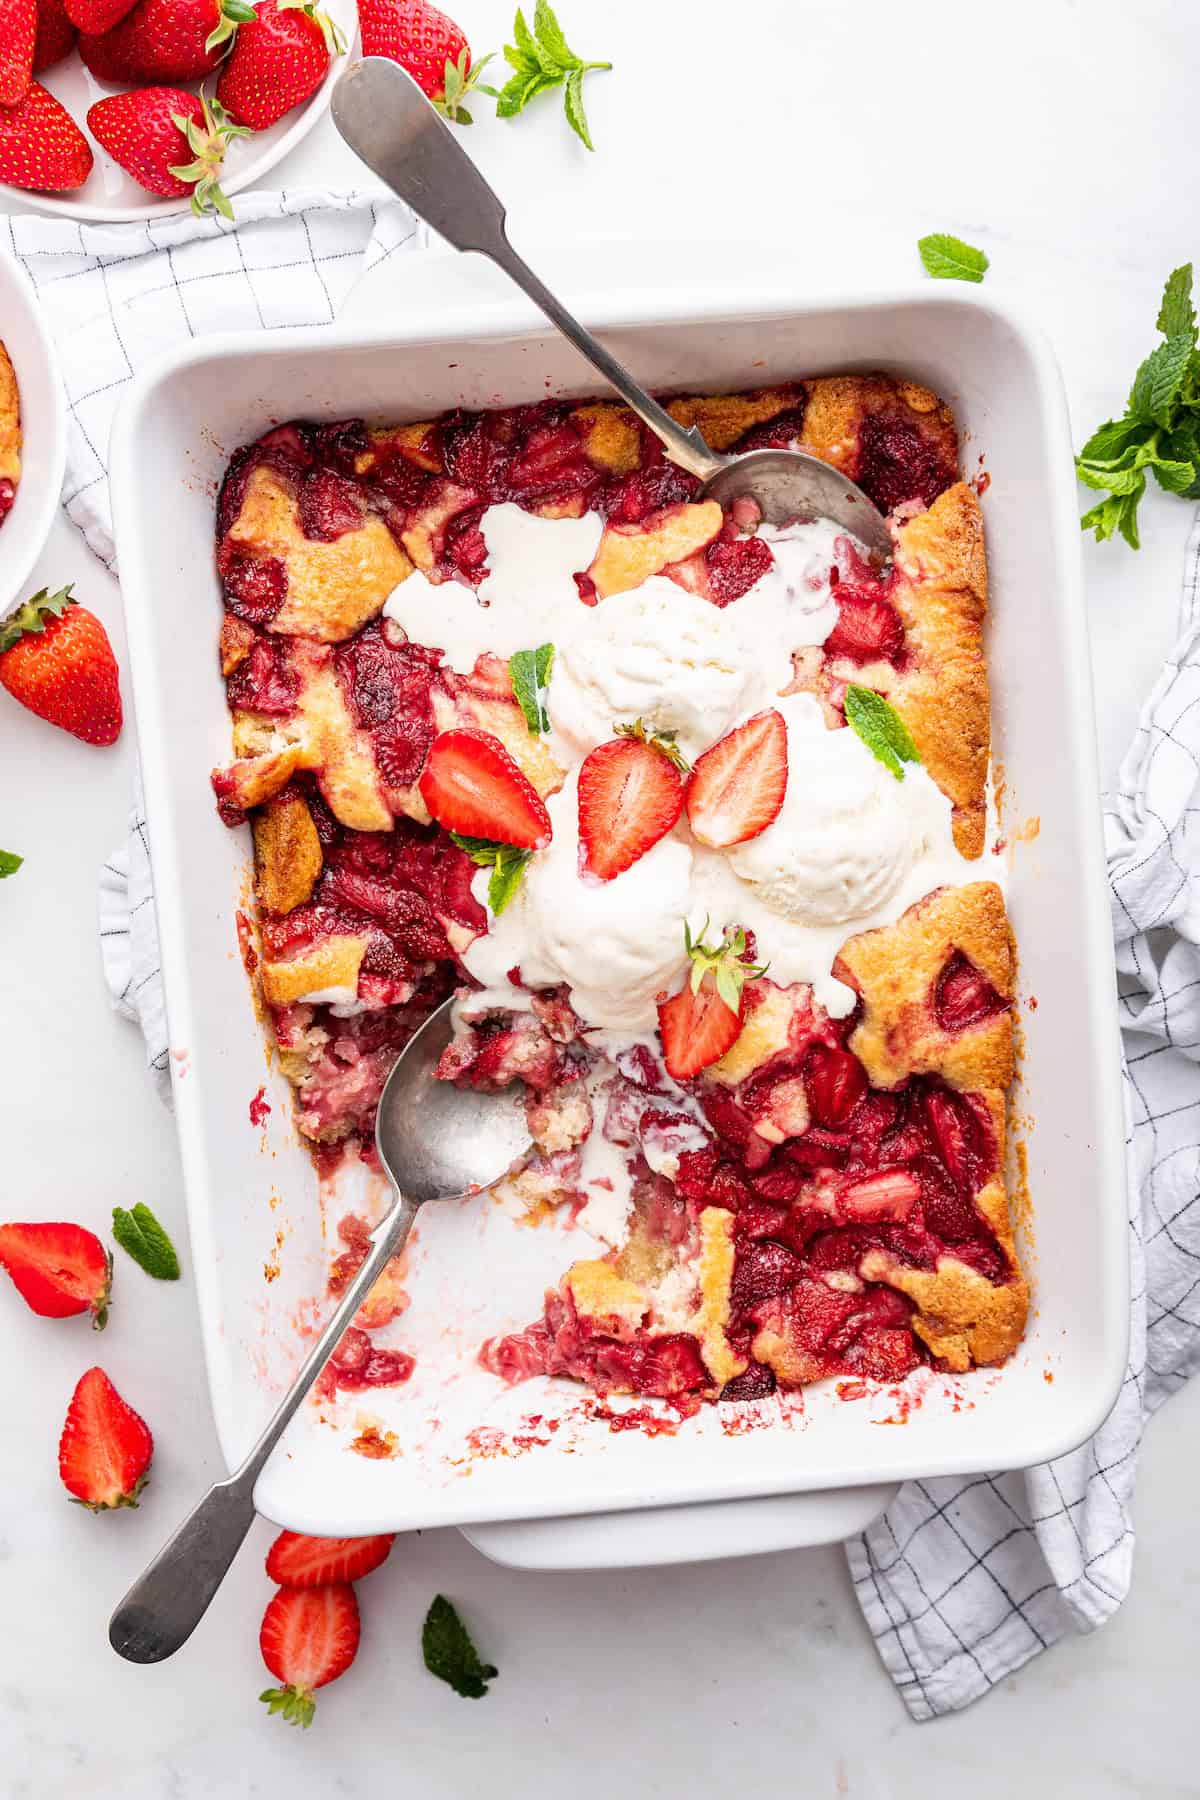 Baking dish of strawberry cobbler with spoons and ice cream